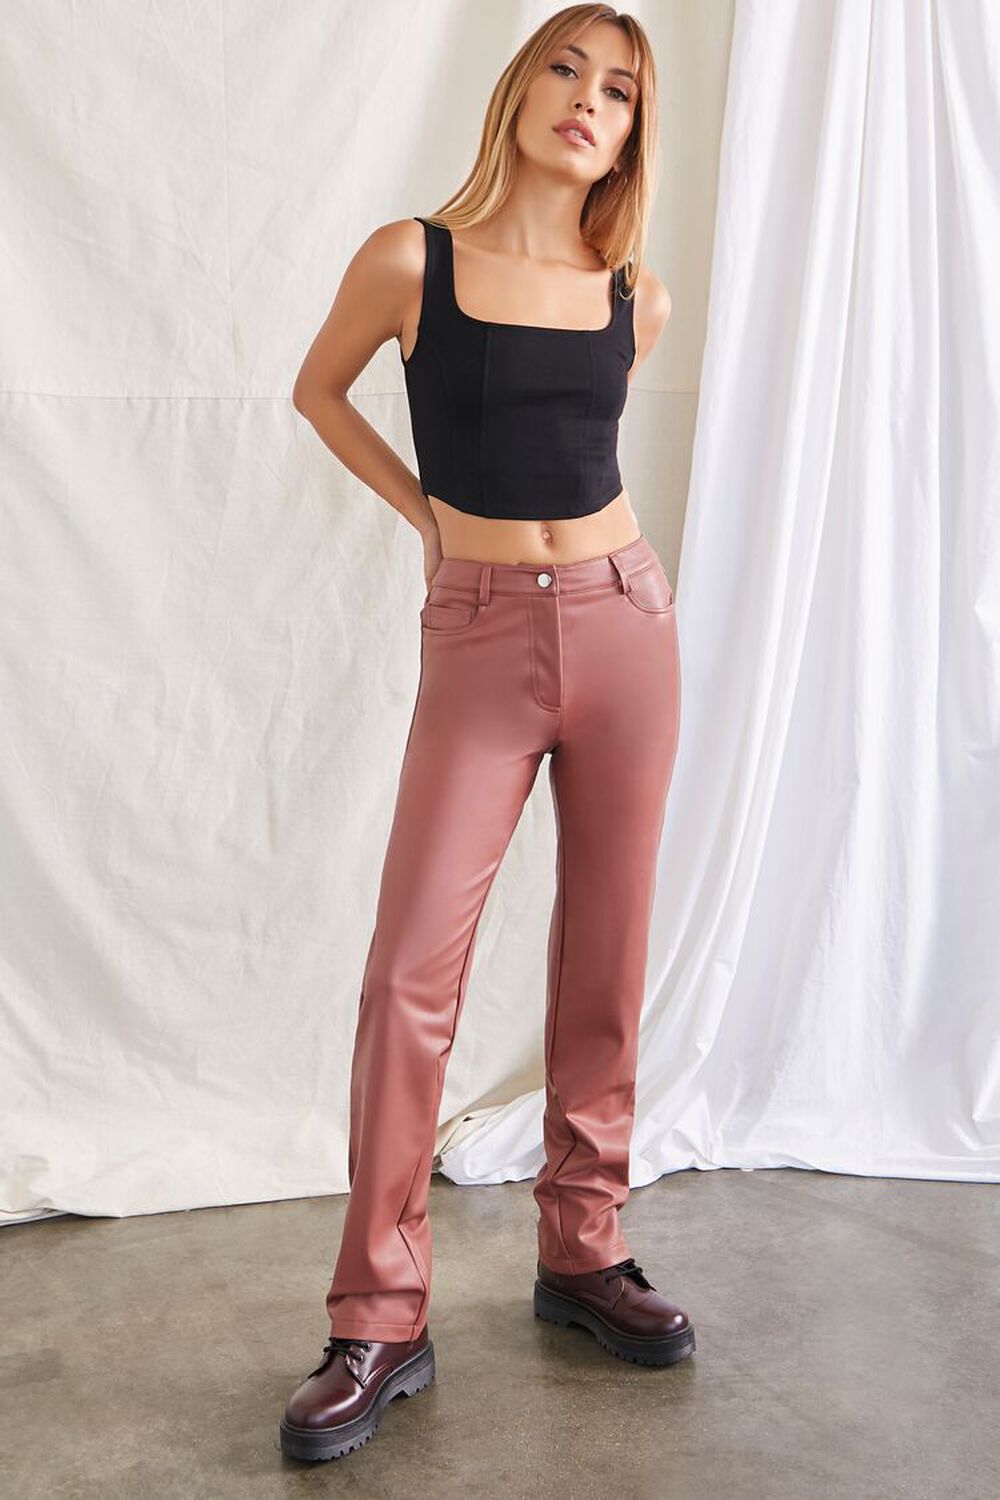 BRONZE Faux Leather High-Rise Pants, image 1